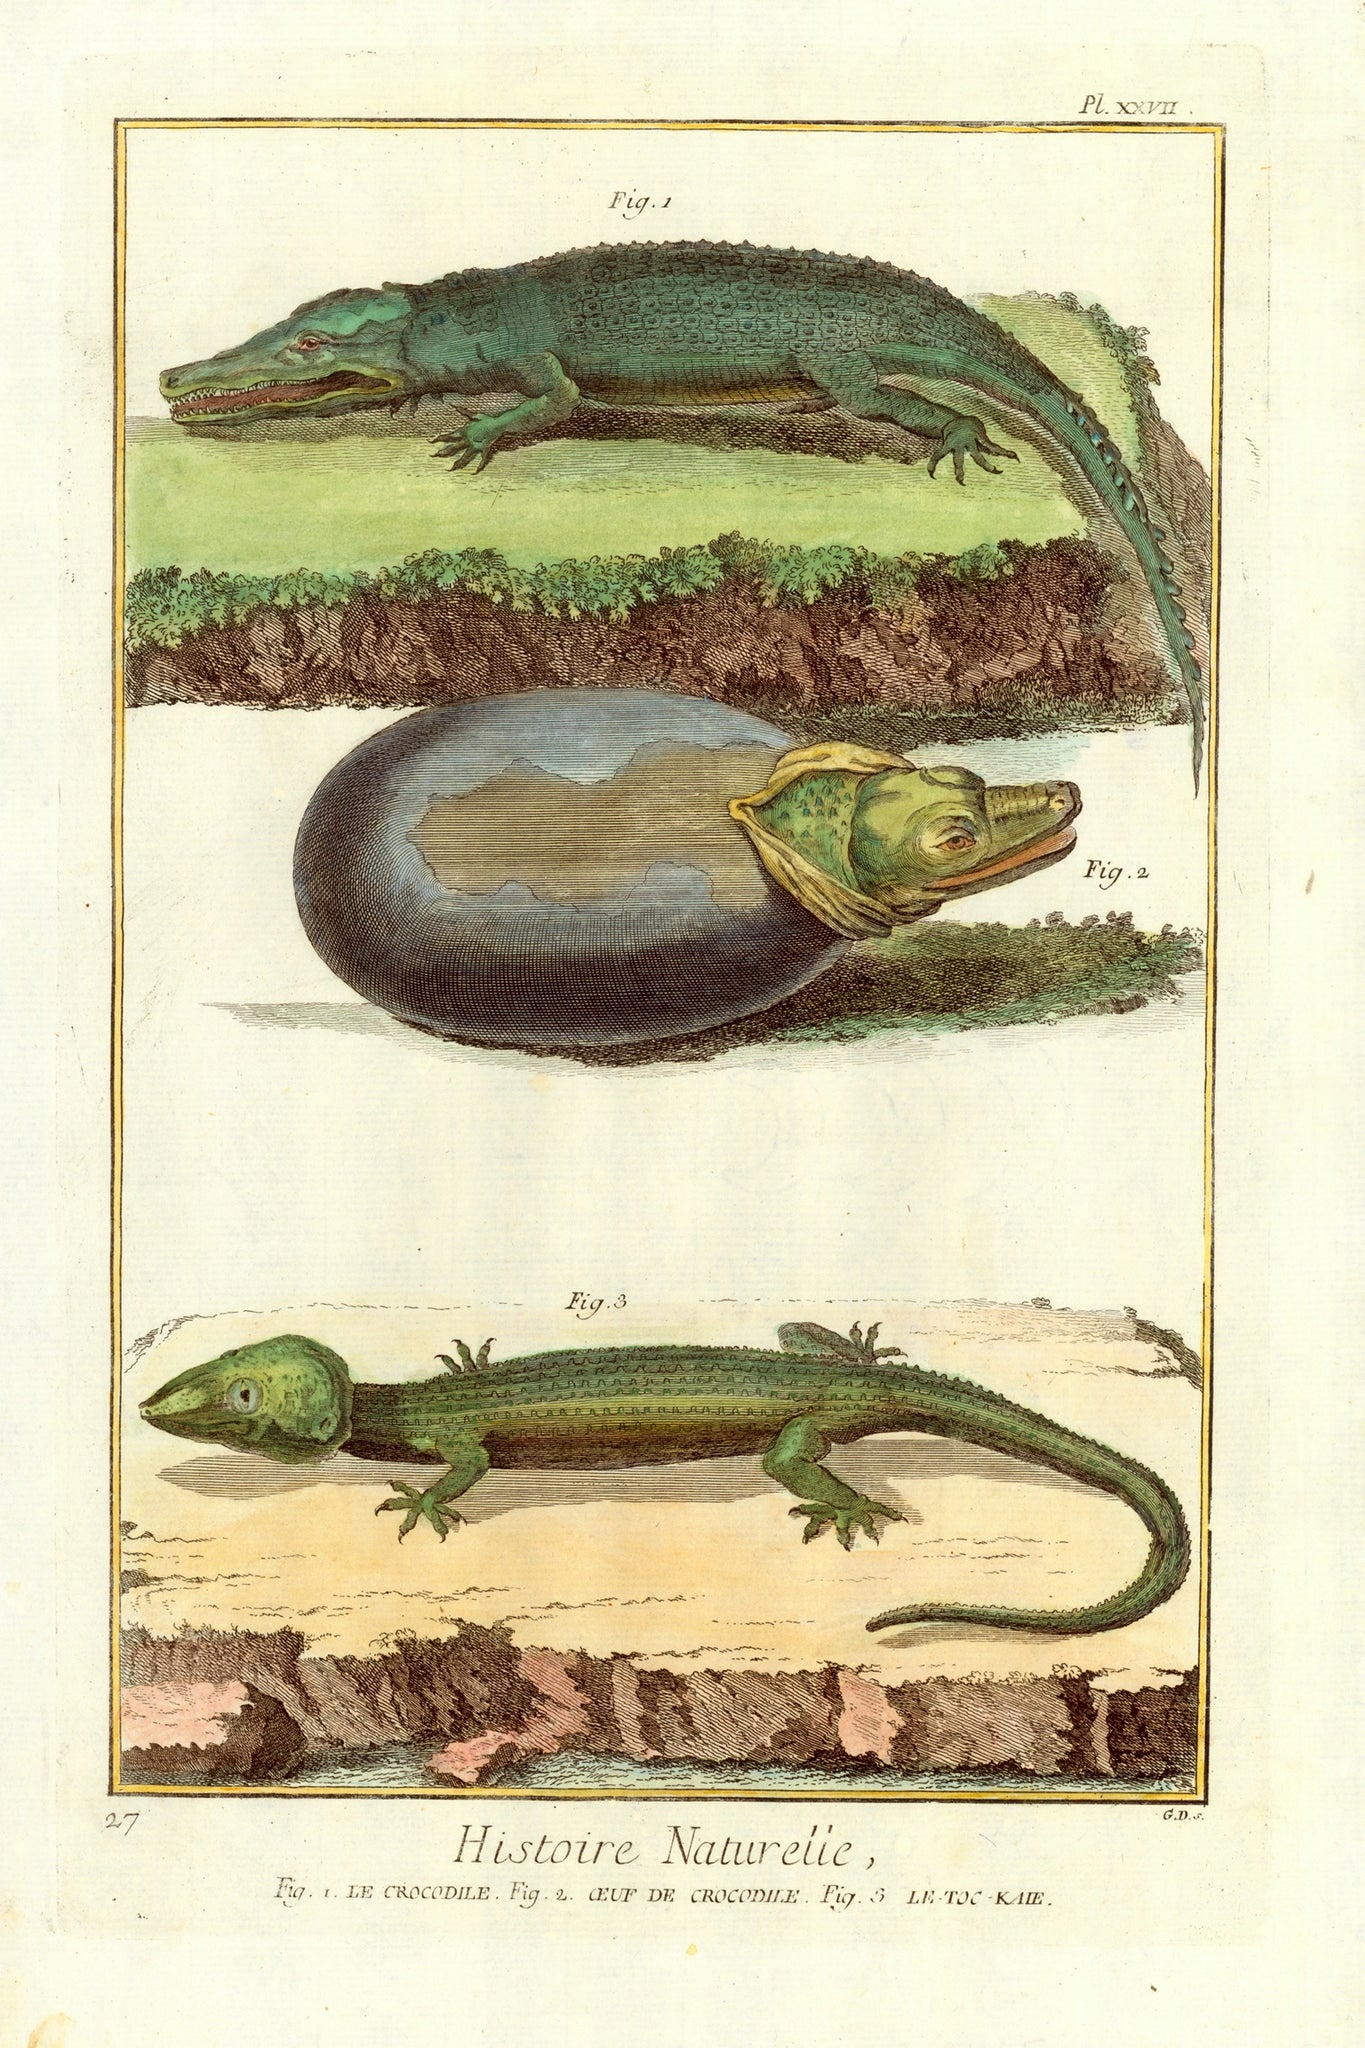 Reptiles, Crocodiles, Fig. 1 Le Crocodile. Fig. 2. Oeuf de Crocodile. Fig. 3. Le-Toc-Kaie  Copper etching from "Histoire Naturelle" published 1751 in Paris